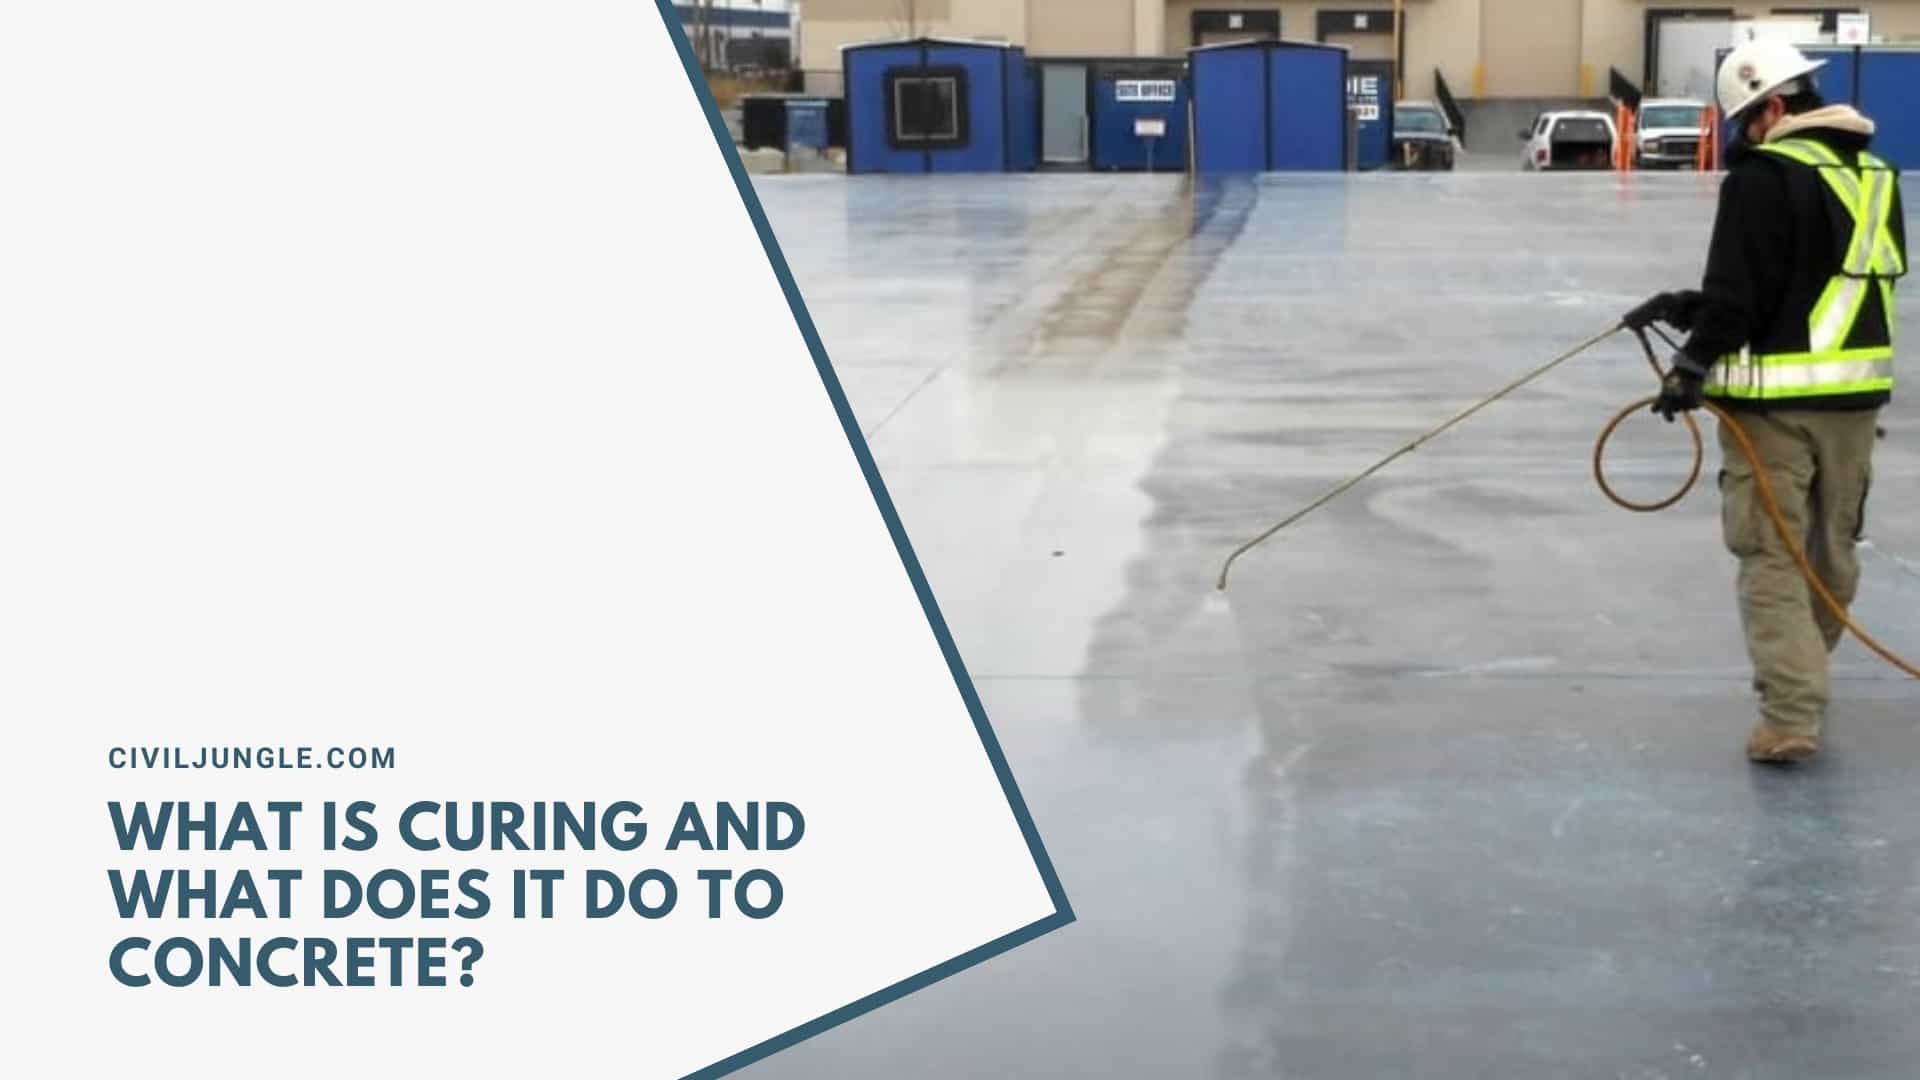 What Is Curing and What Does It Do to Concrete?